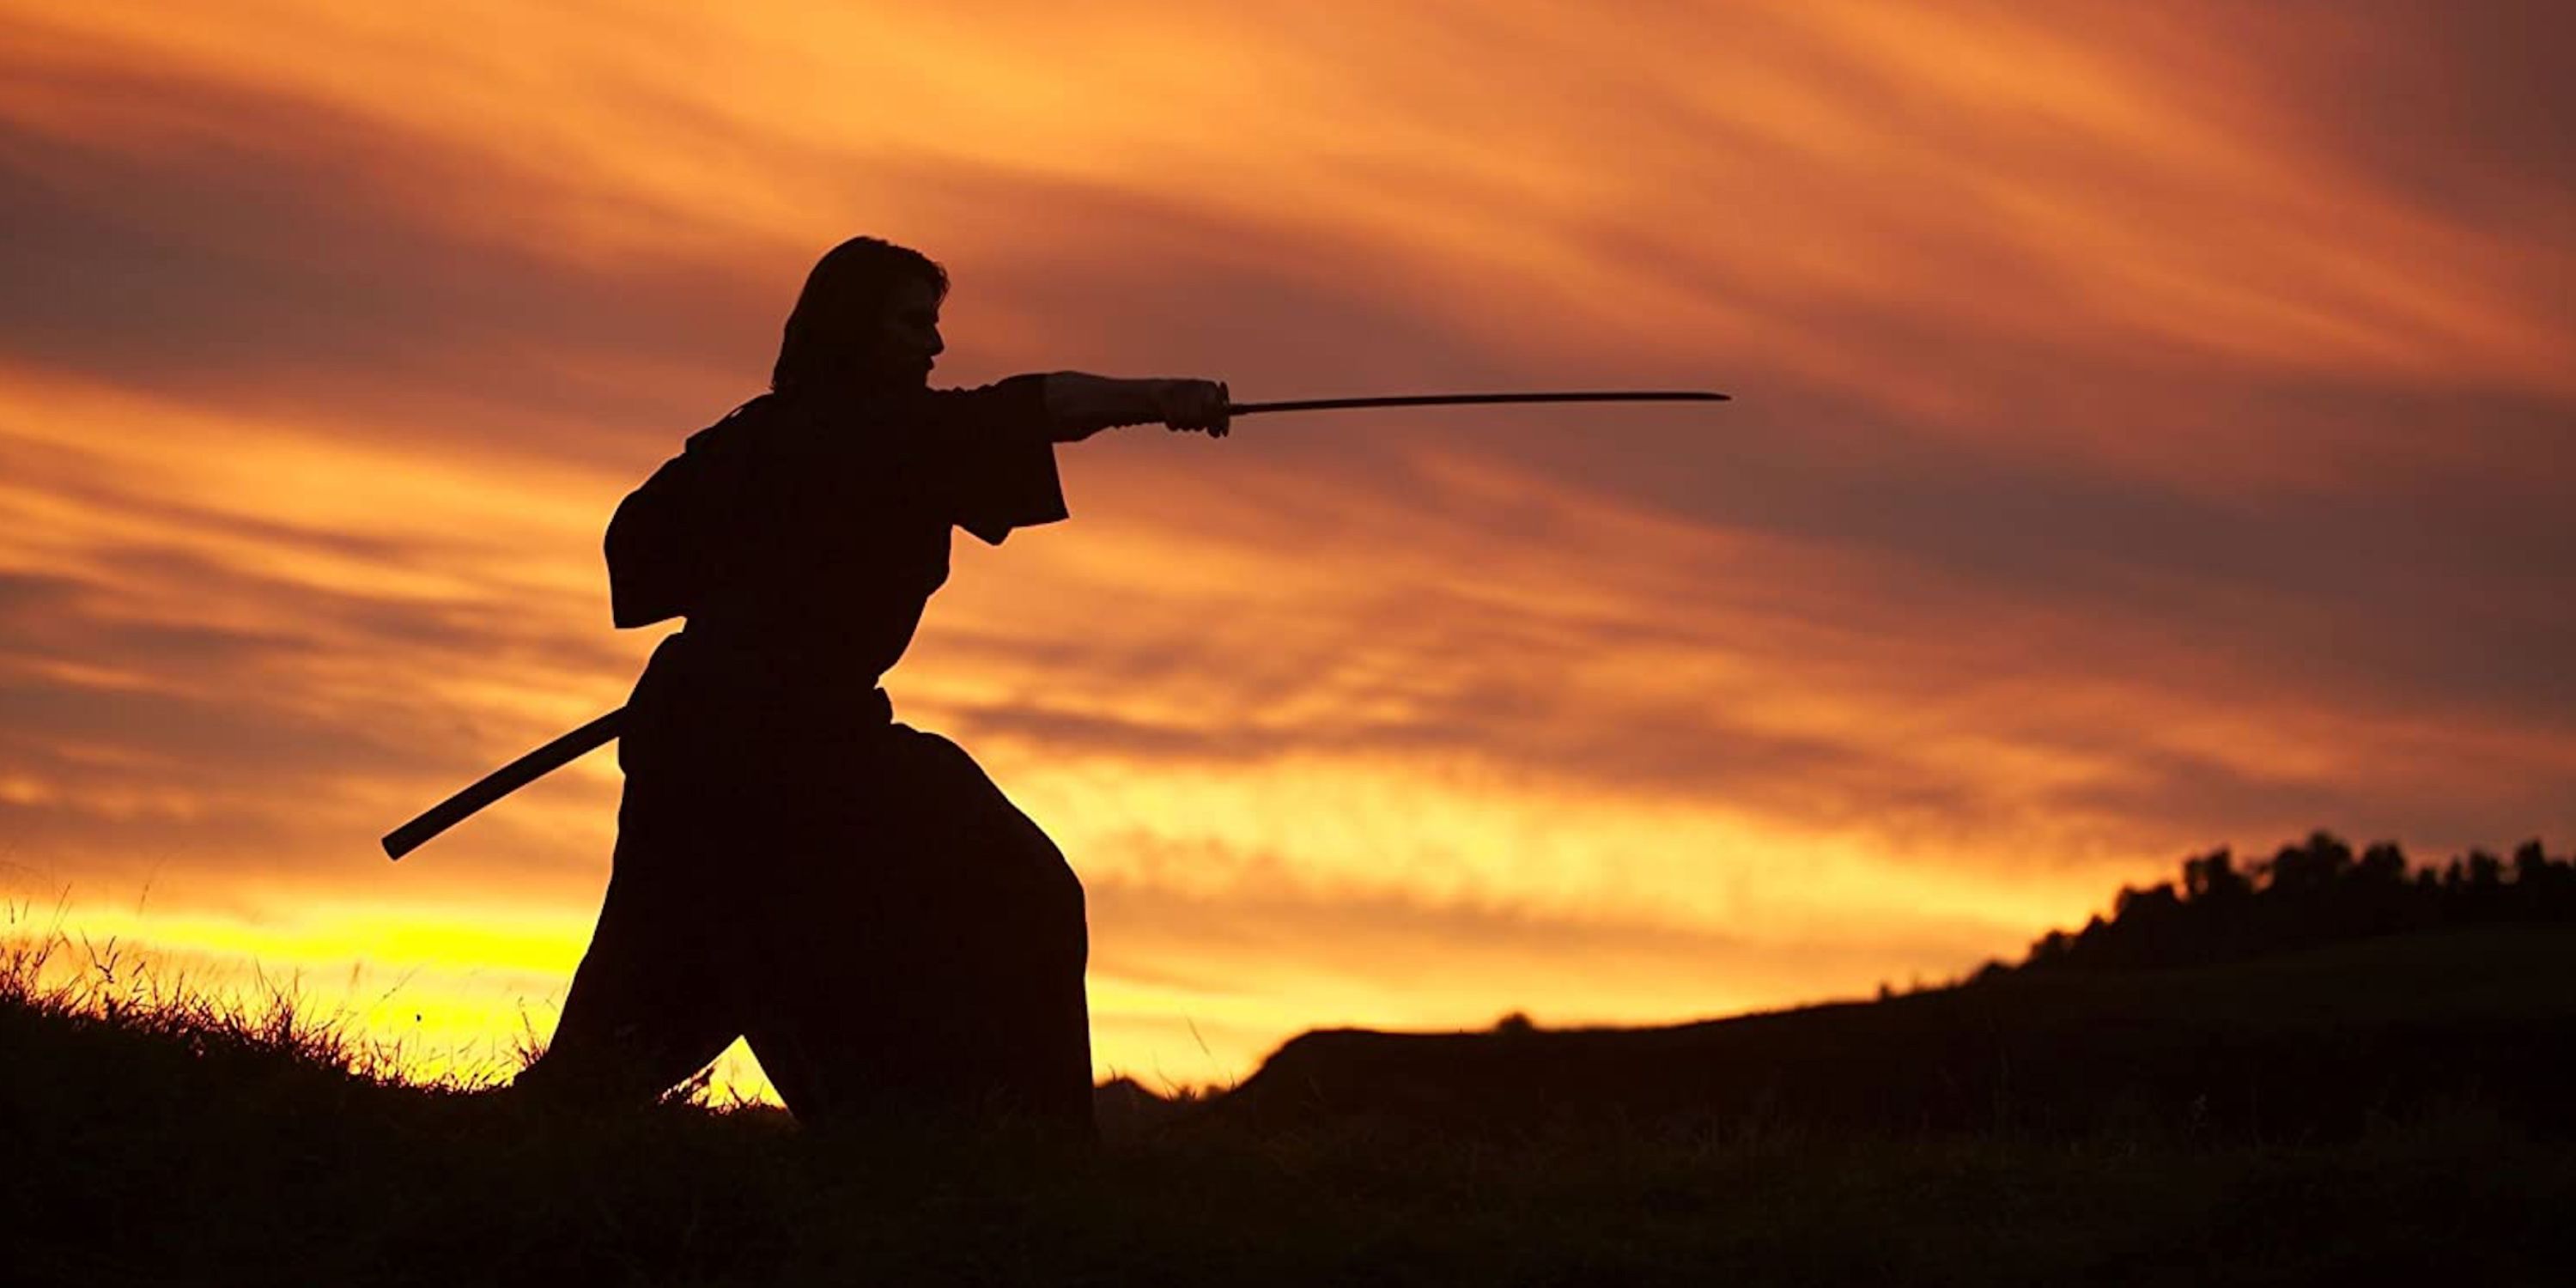 Tom Cruise practicing with a sword at sunset in The Last Samurai